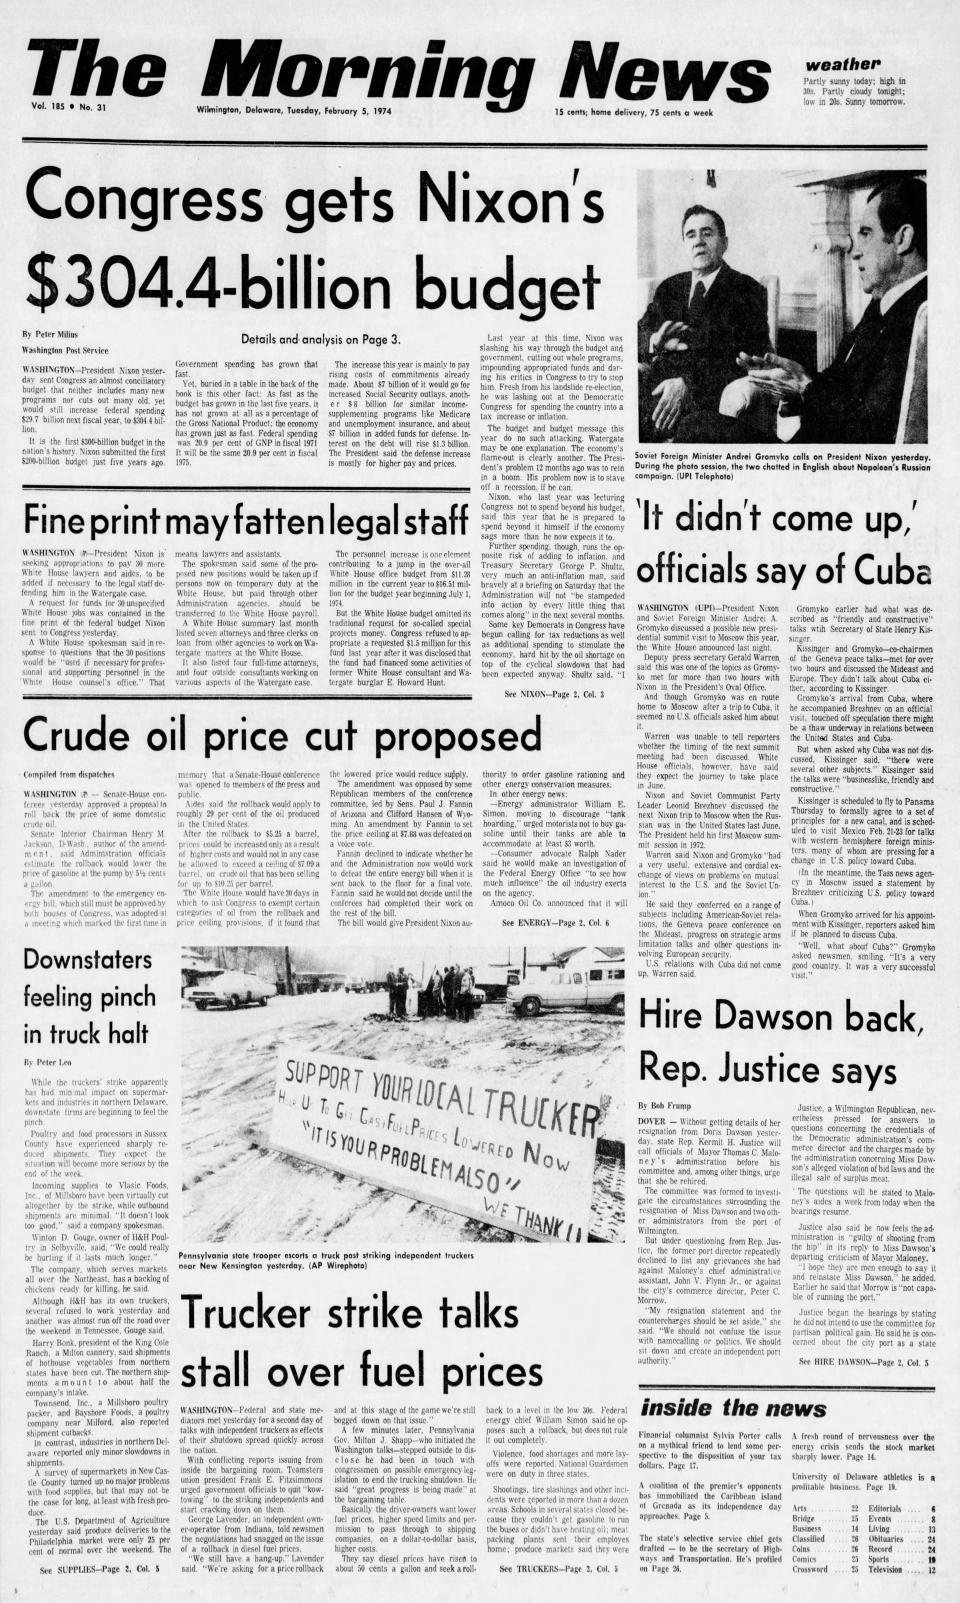 Front page of The Morning News from Feb. 5, 1974.